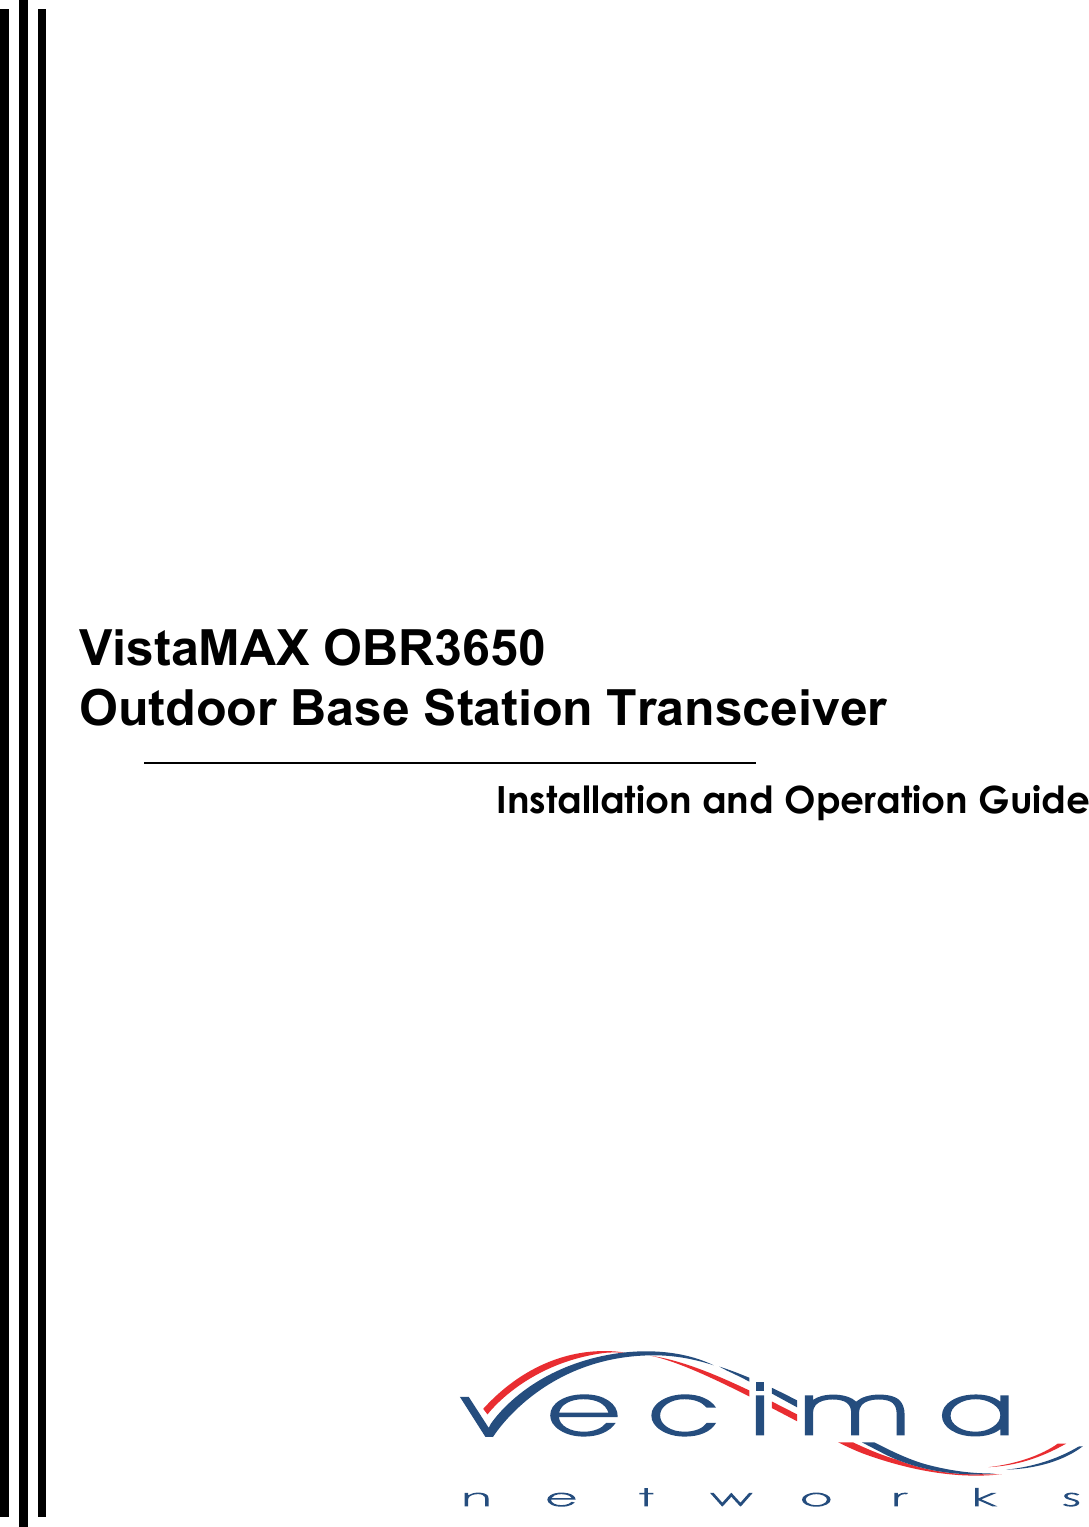                Installation and Operation GuideVistaMAX OBR3650Outdoor Base Station Transceiver